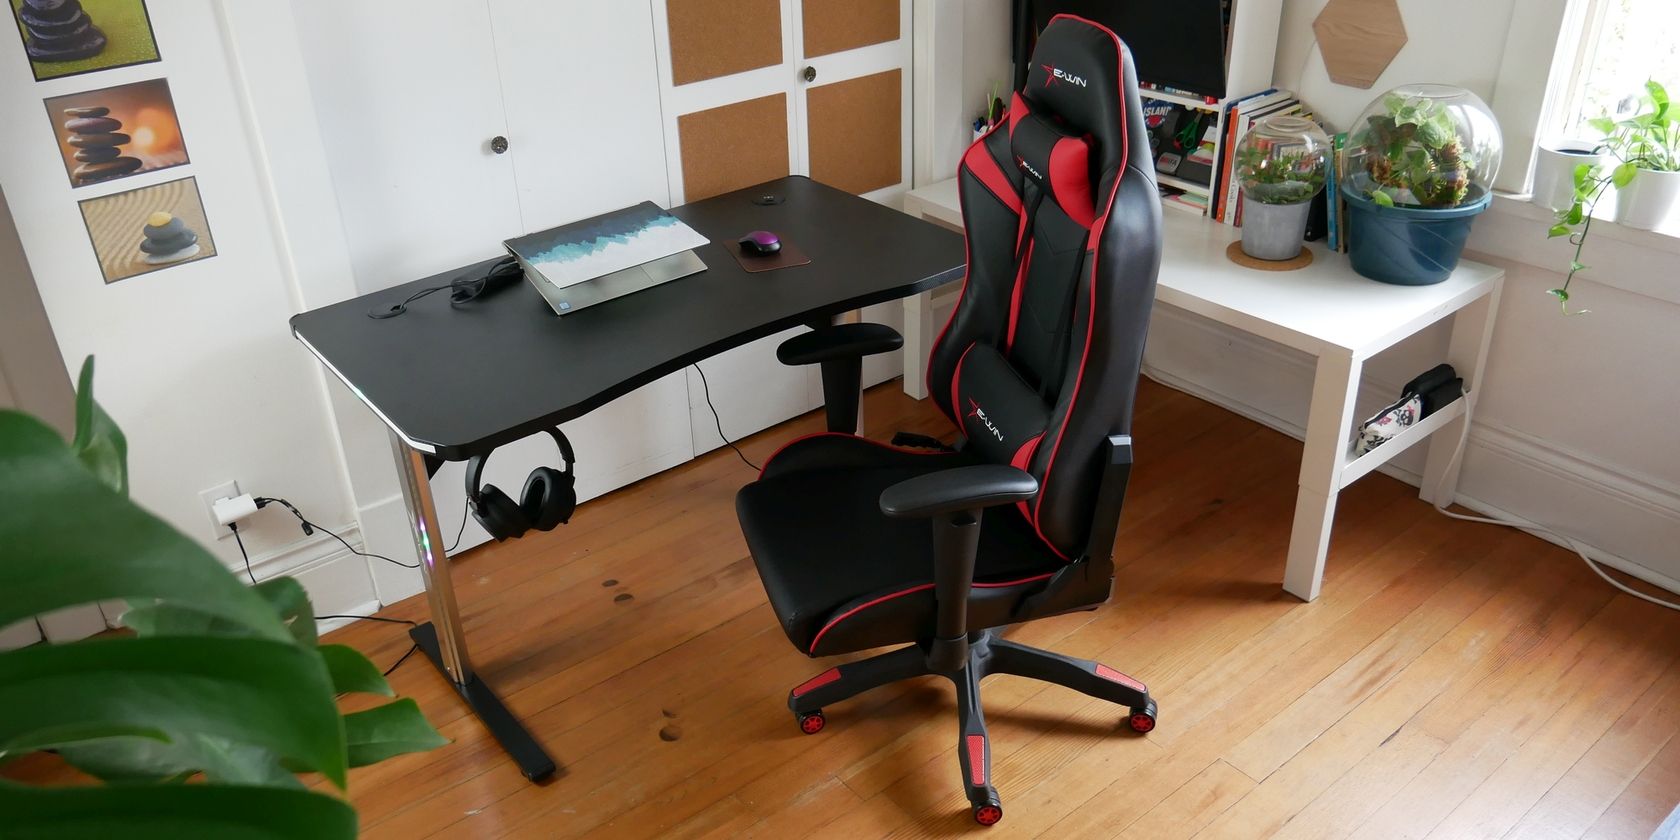 E-Win Chair and Desk Featured